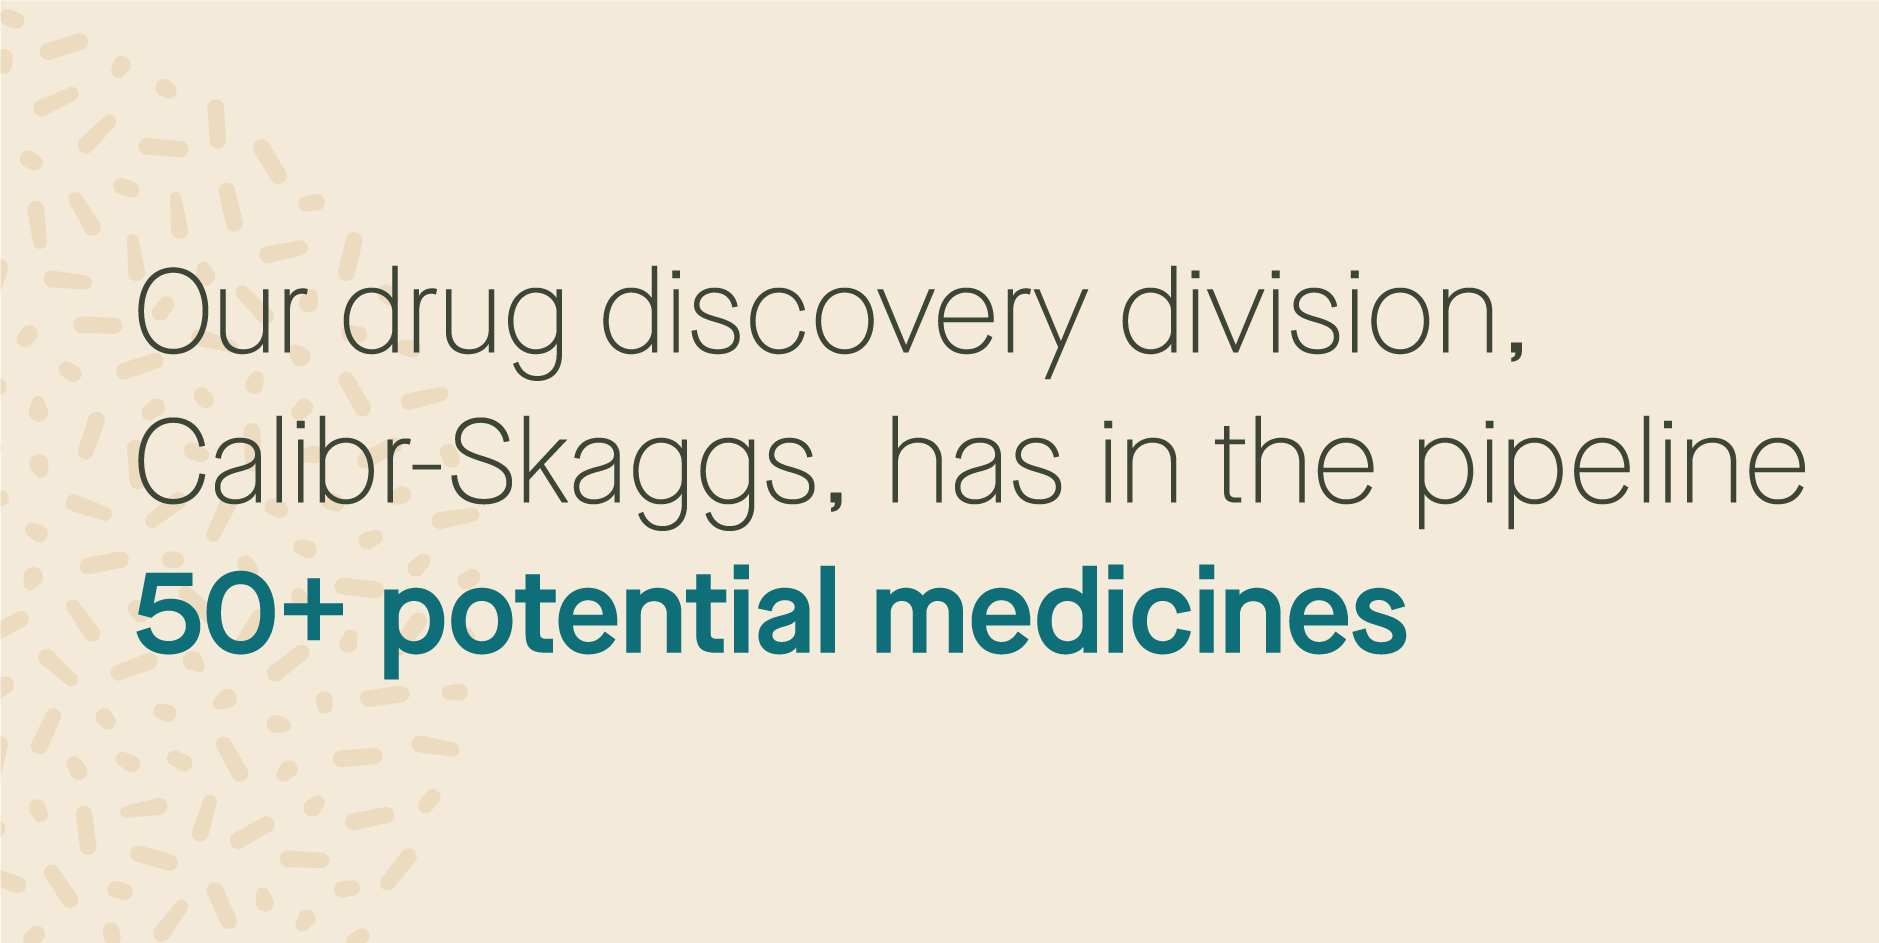 Our drug discovery division, Calibr, has 50+ potential medicines in the pipeline